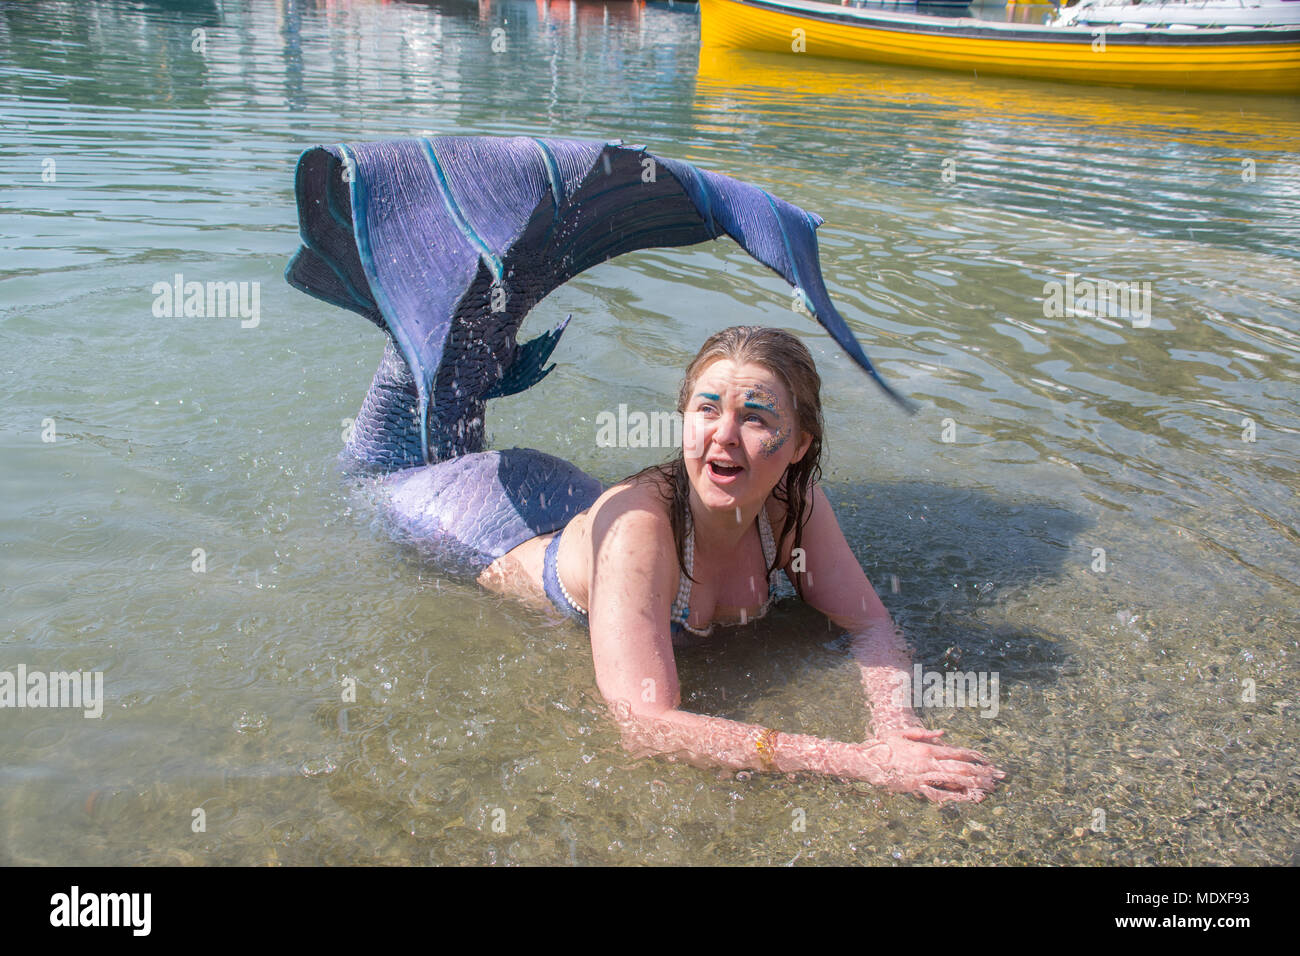 Porthleven, Cornwall, UK. 21st April 2018. UK Weather  It was warm and sunny for  Laura Evans, the St Ives Mermaid, out in the water at the Porthleven Food festival today. Credit: Simon Maycock/Alamy Live News Stock Photo